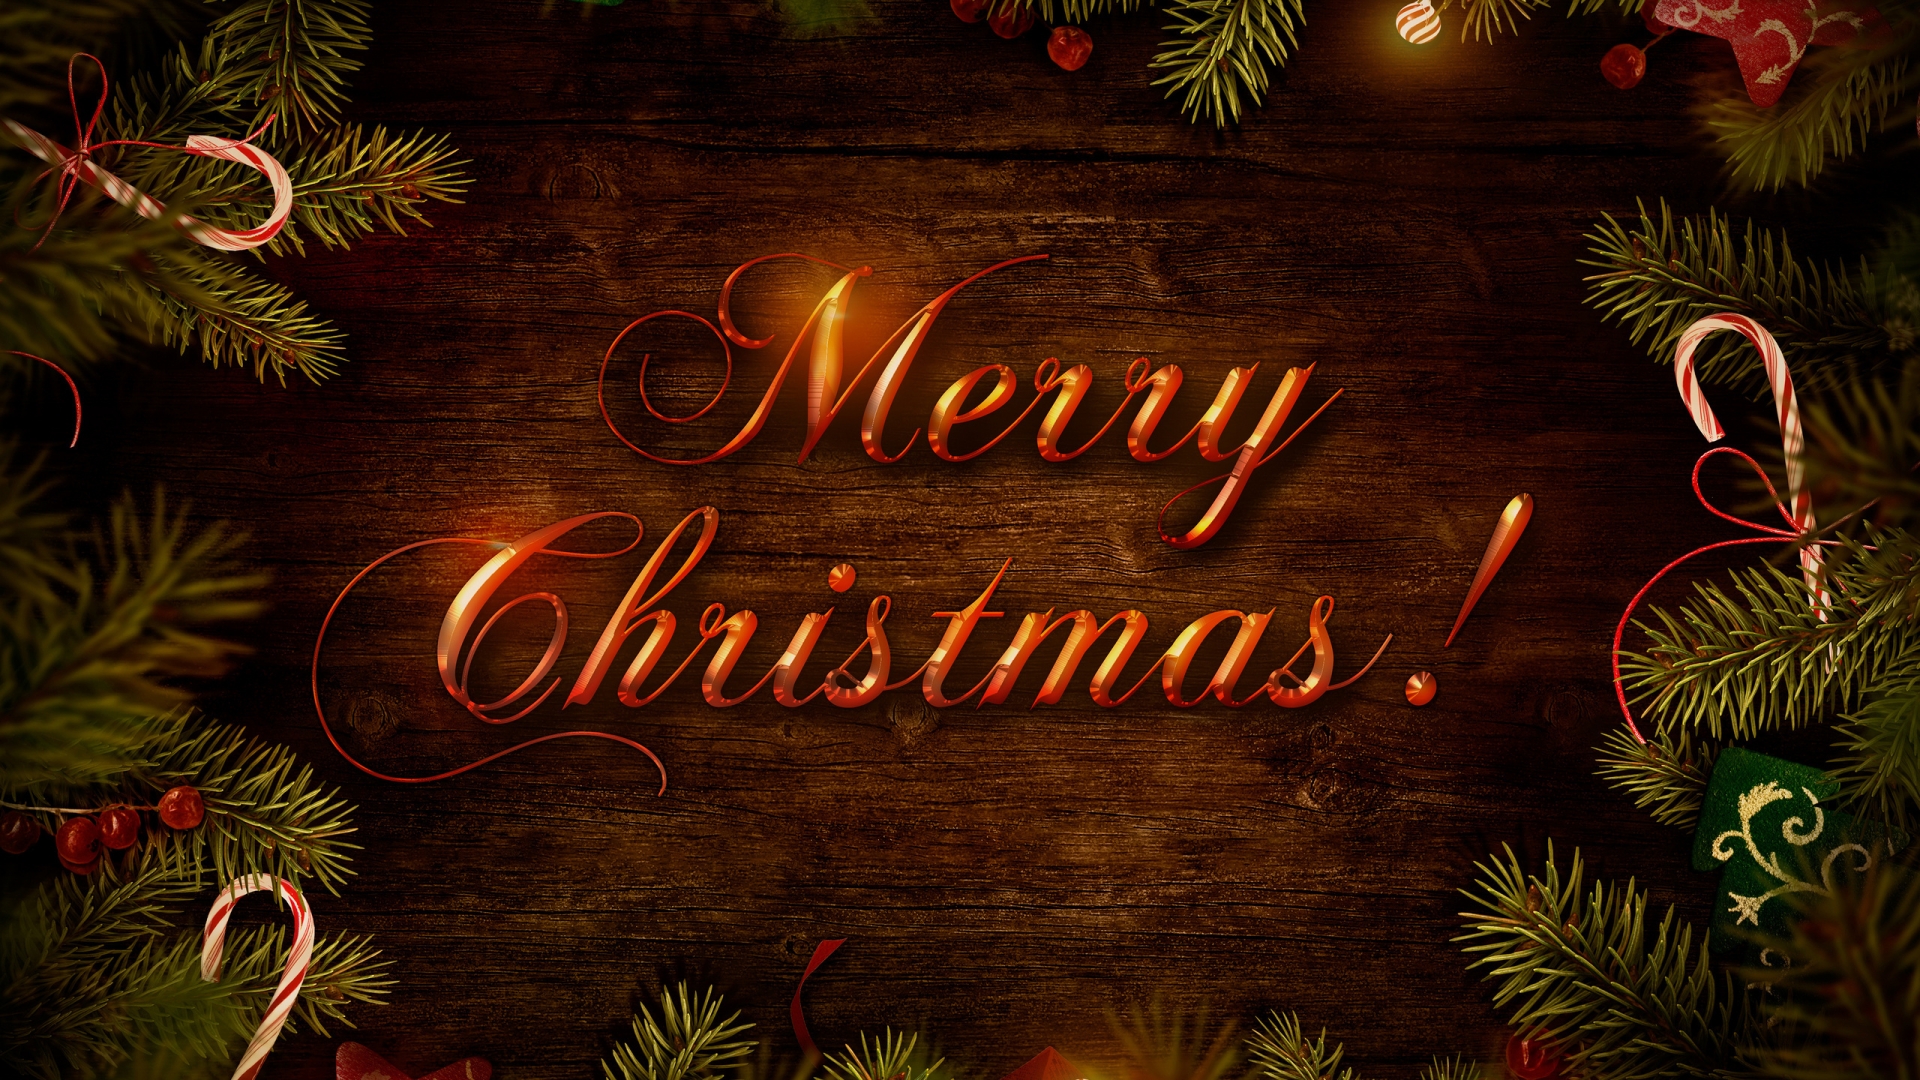 Merry Christmas Wish Decoration for 1920 x 1080 HDTV 1080p resolution